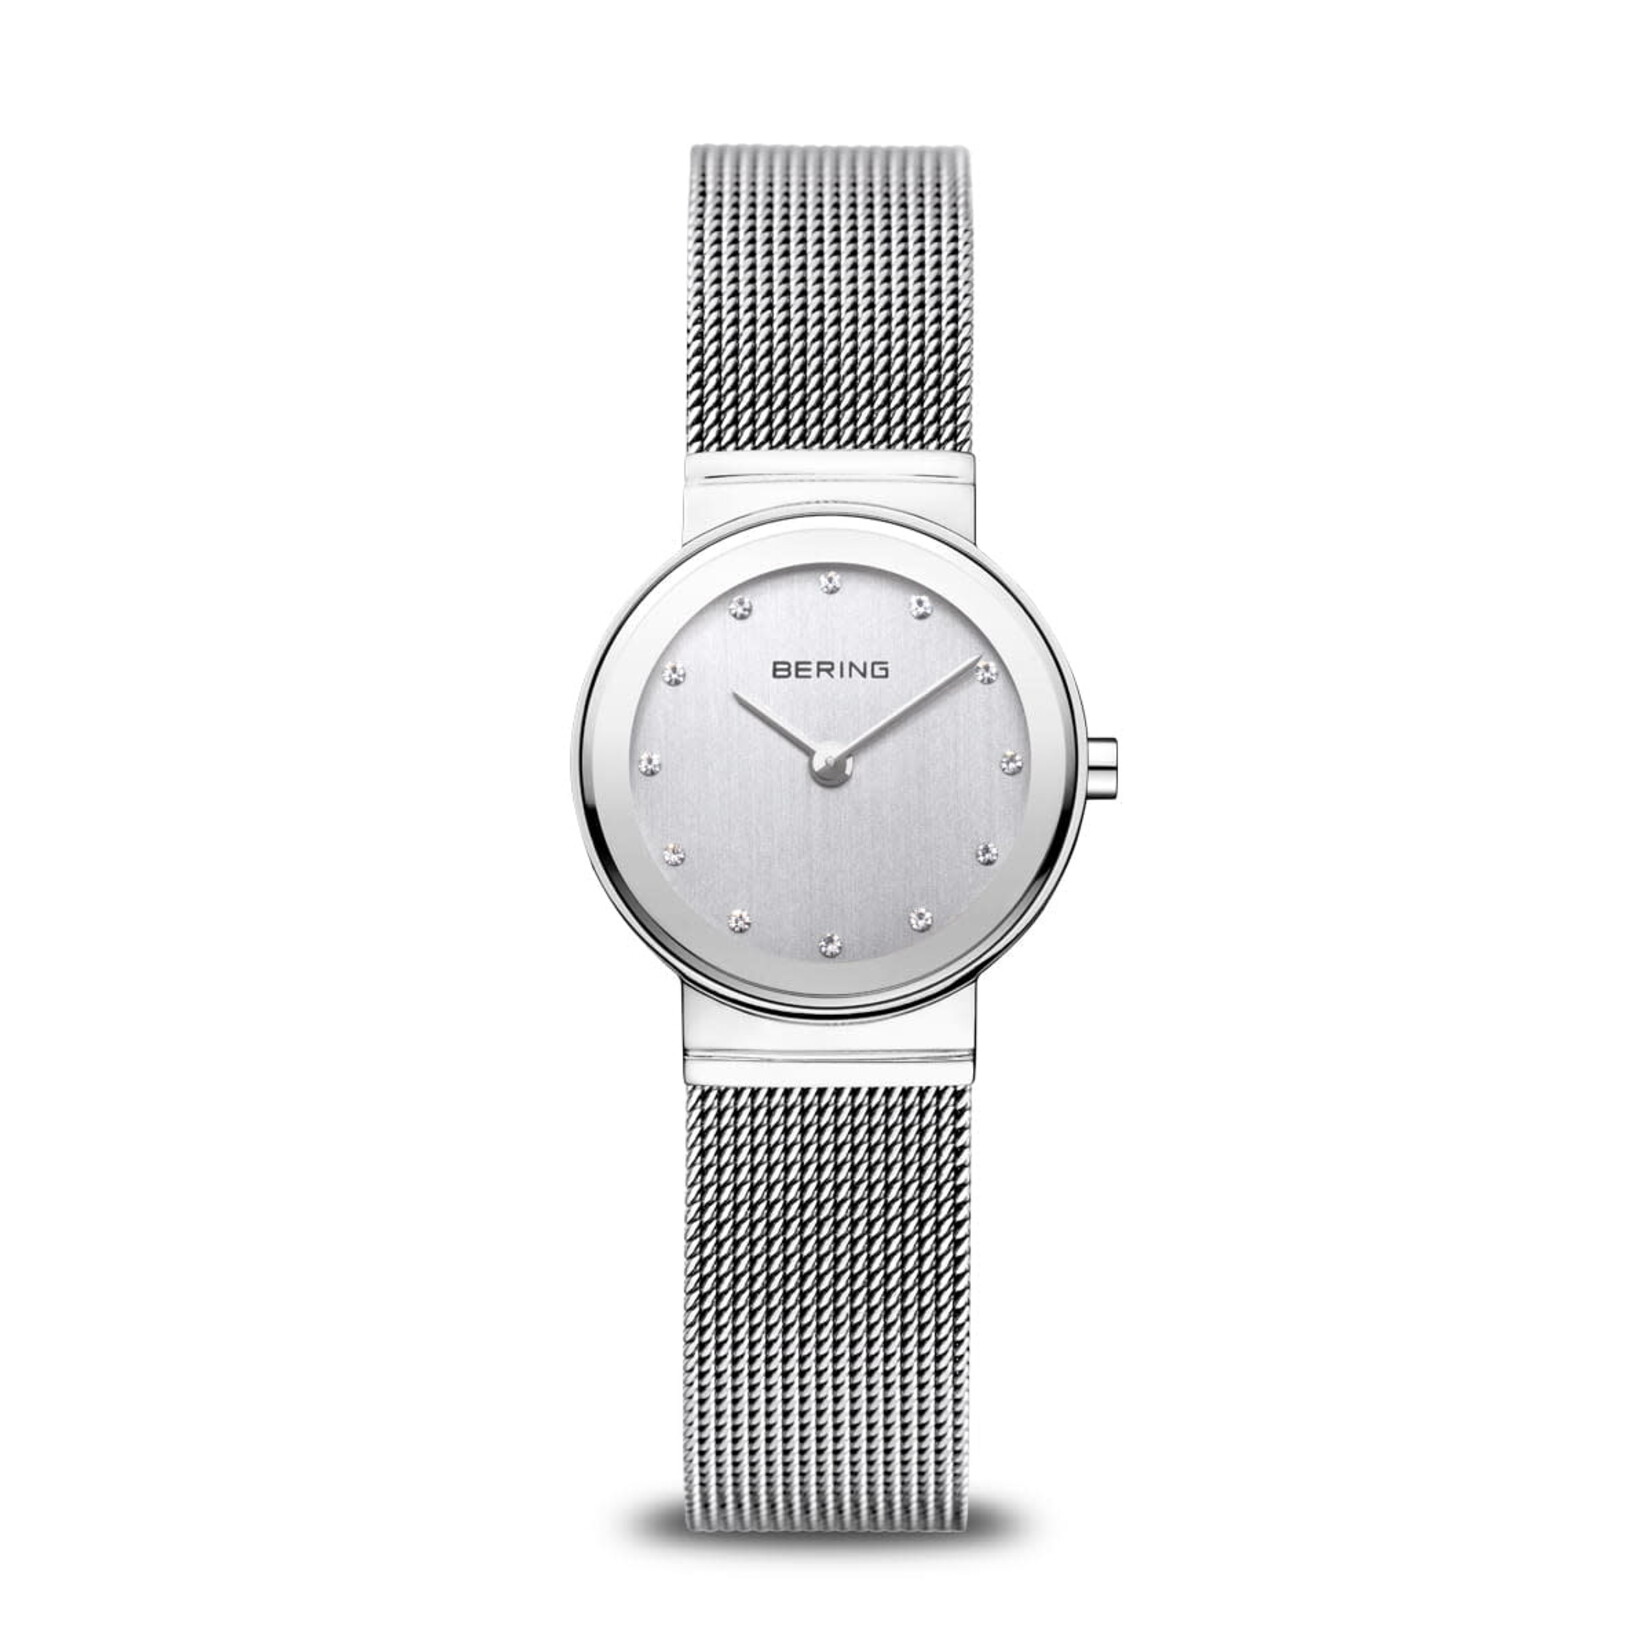 Bering Silver Swarovski Hour Small Face Watch